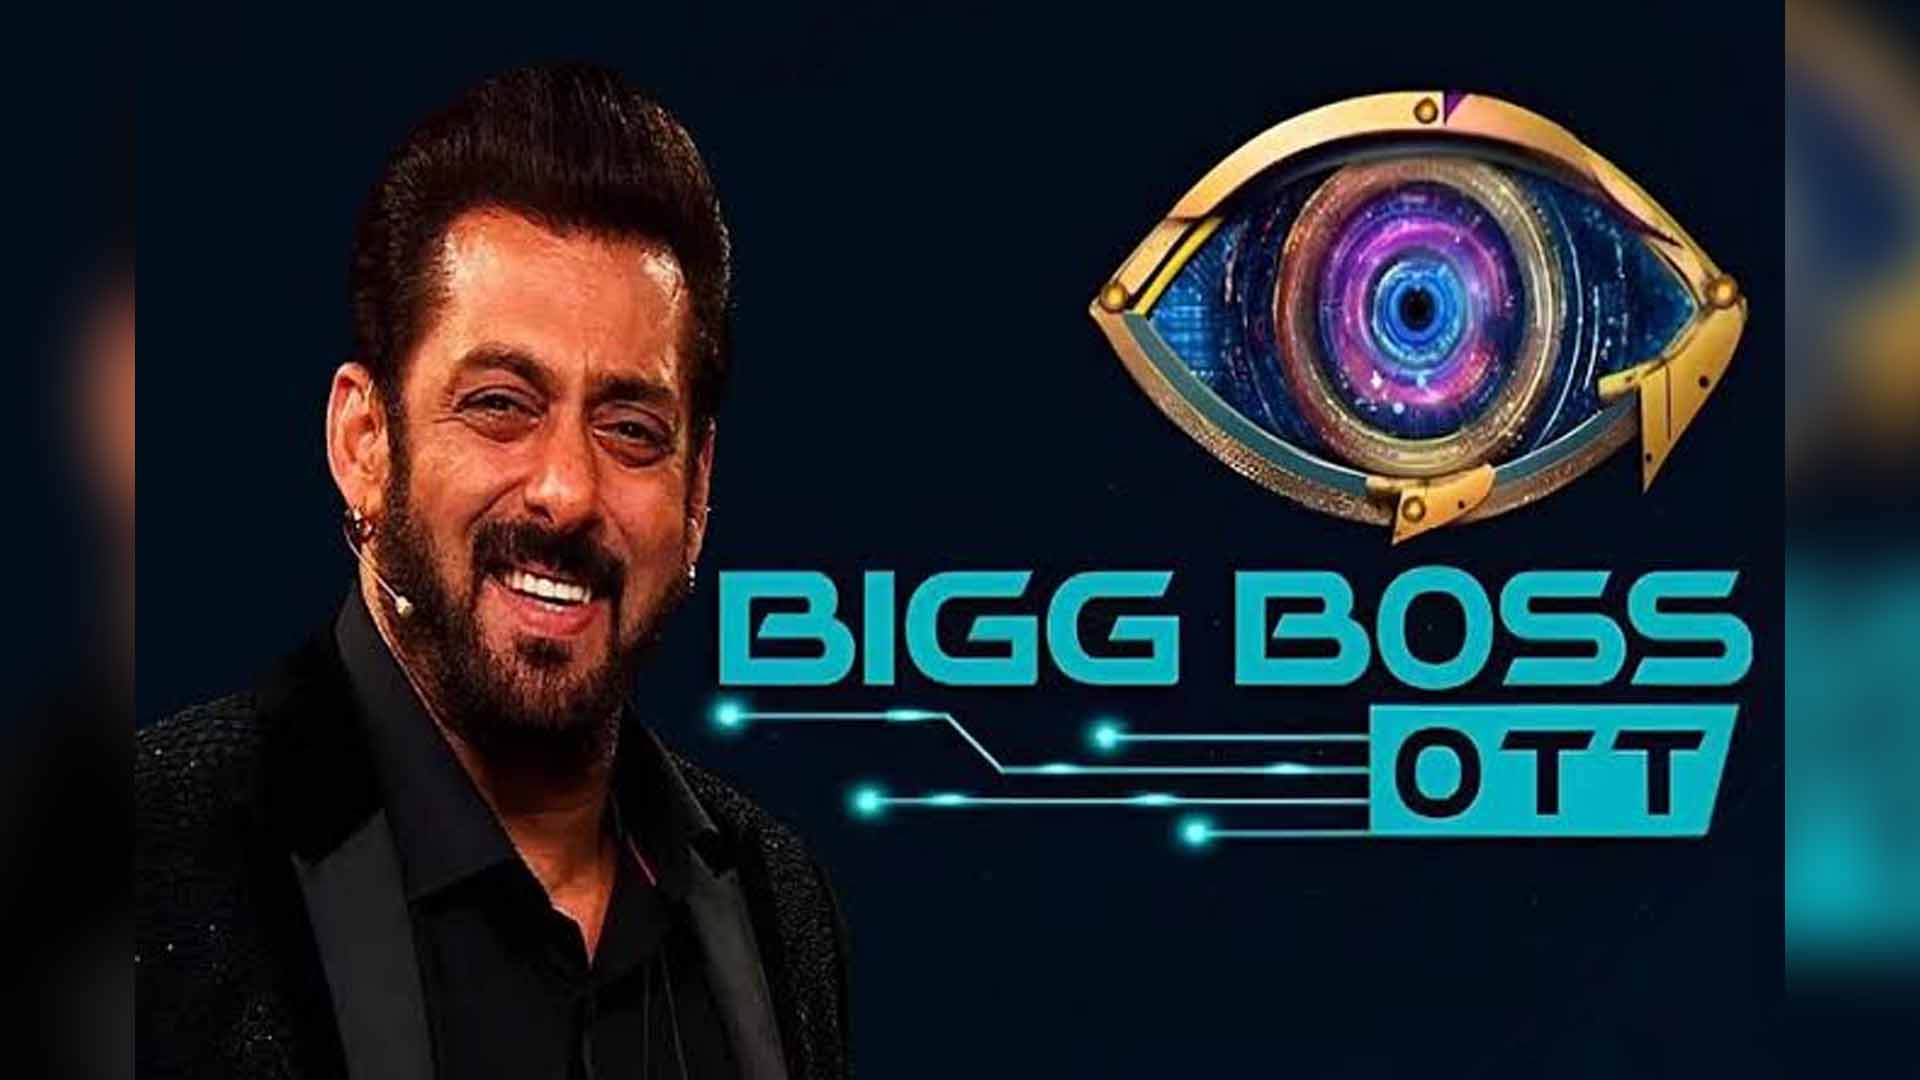 Ticket to Finale week announced on BIGG BOSS OTT 2! It’s time to Viral your videos!!